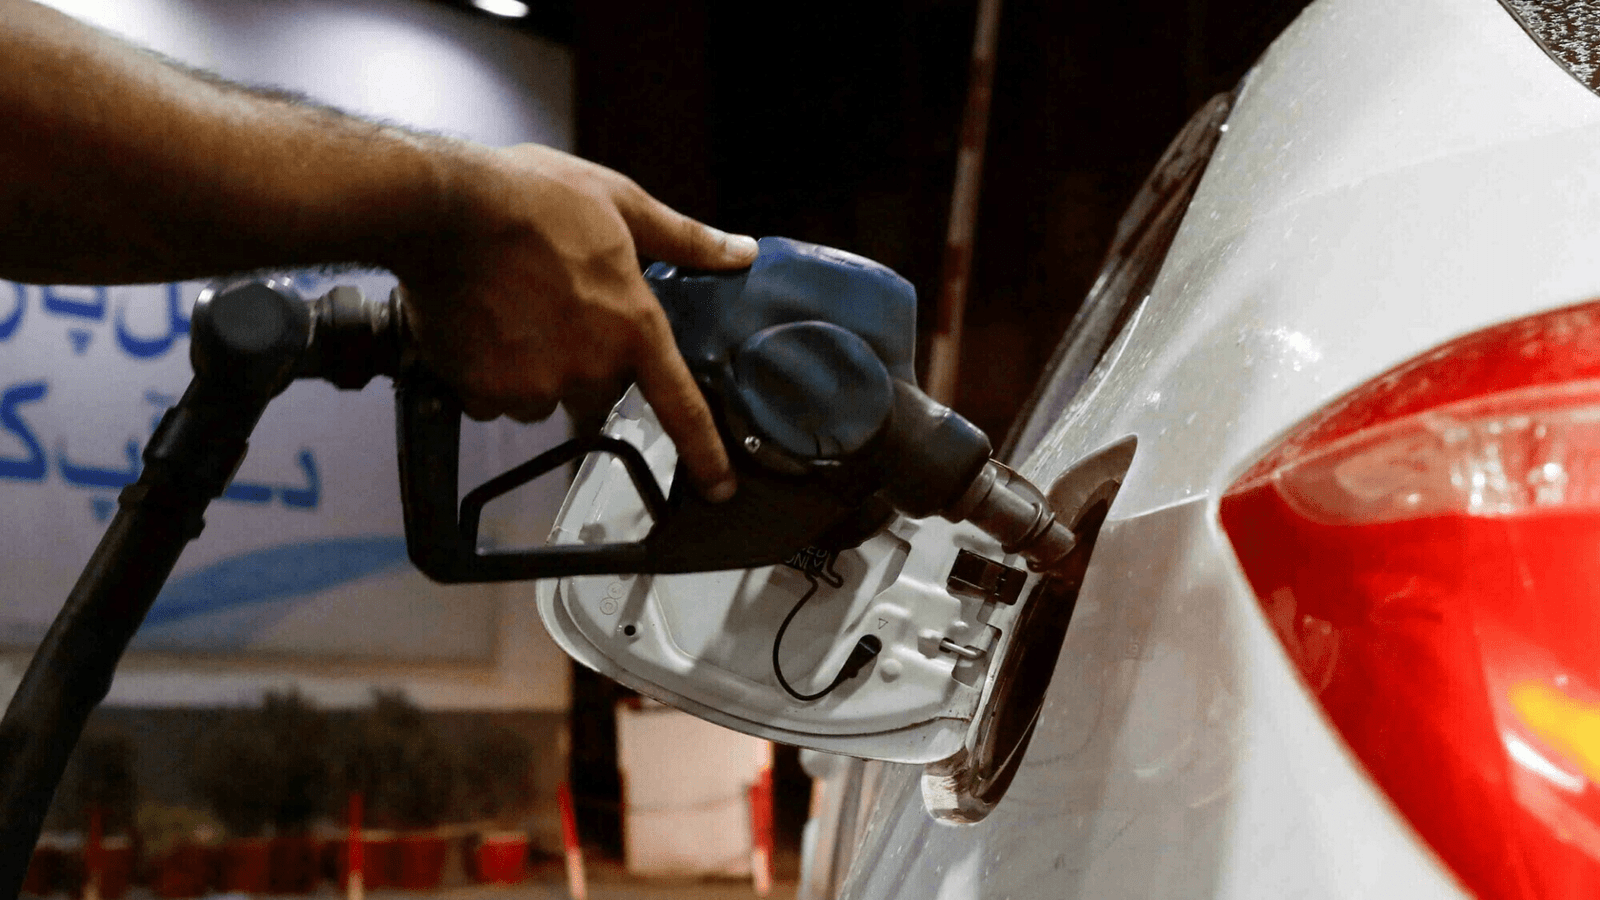 Petrol price increased by Rs4.53 per litre